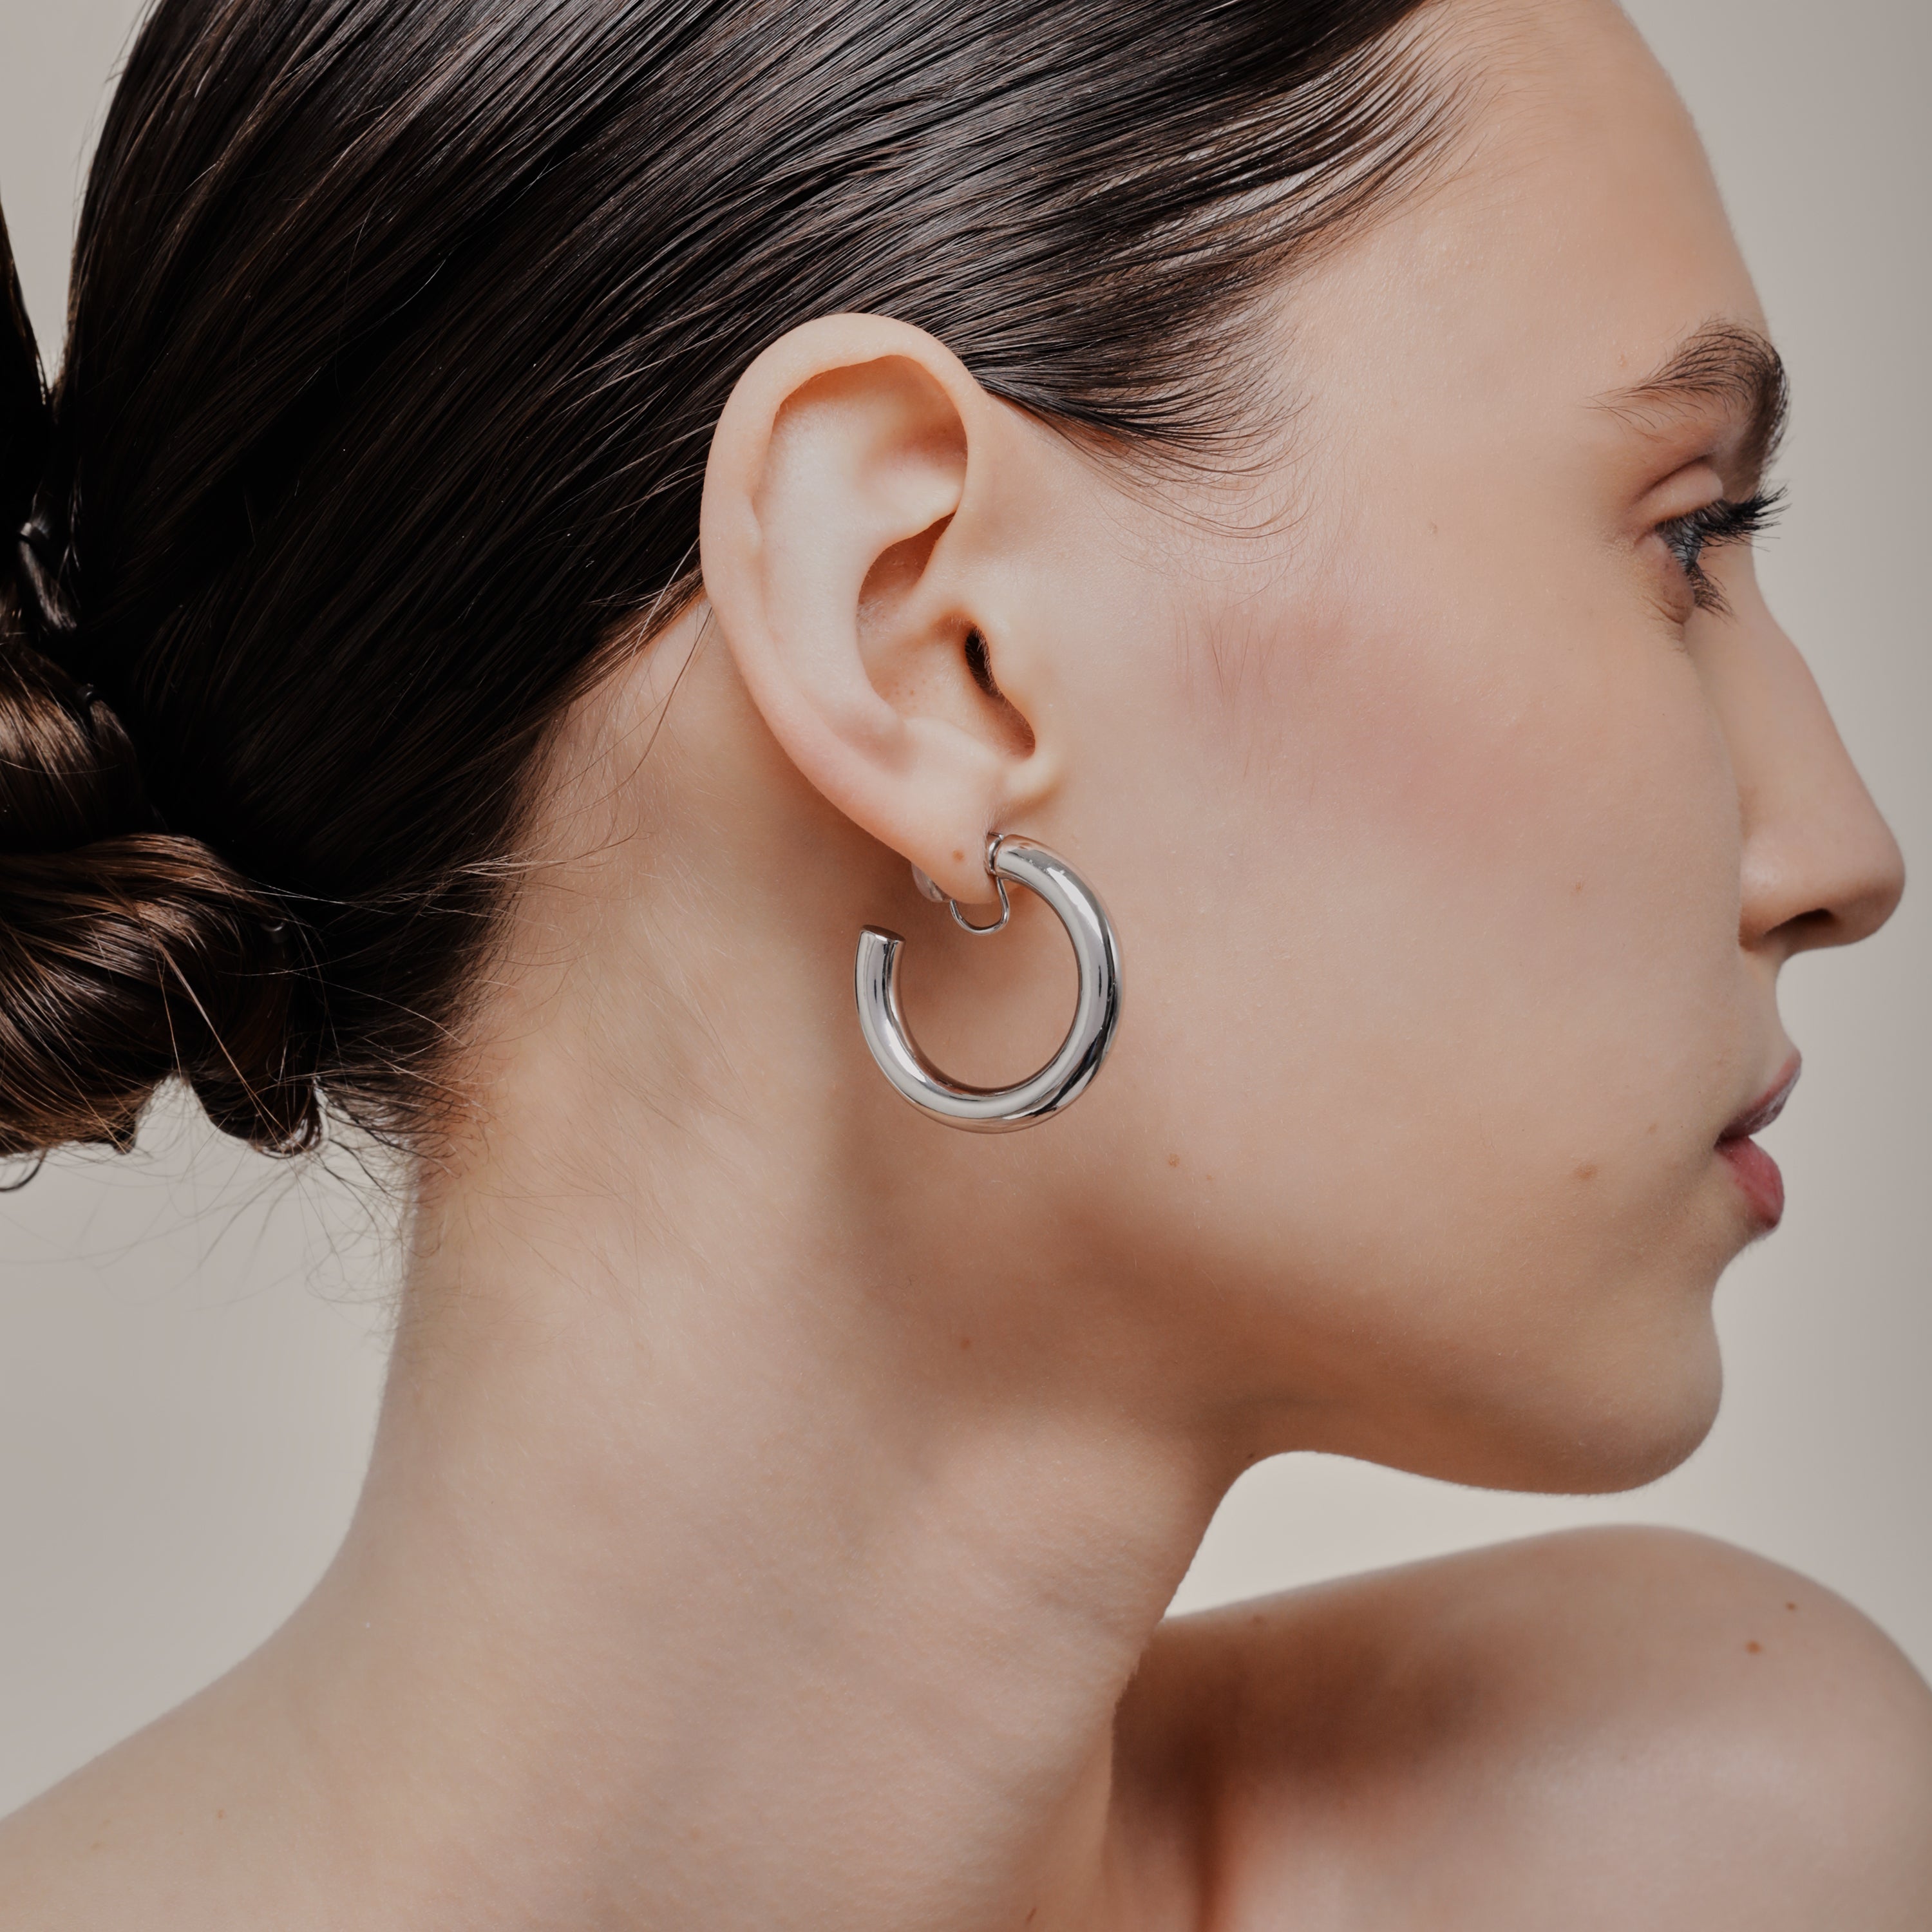 A model wearing the Allie Hoop Clip On Earrings in Silver, which are perfect for all ear types. The Mosquito Coil Clip-On Closure is suitable for Thick/Large, Sensitive, Small/Thin, Stretched/Healing, and Keloid Prone Ears. Made of a silver tone copper alloy, each purchase includes one pair.